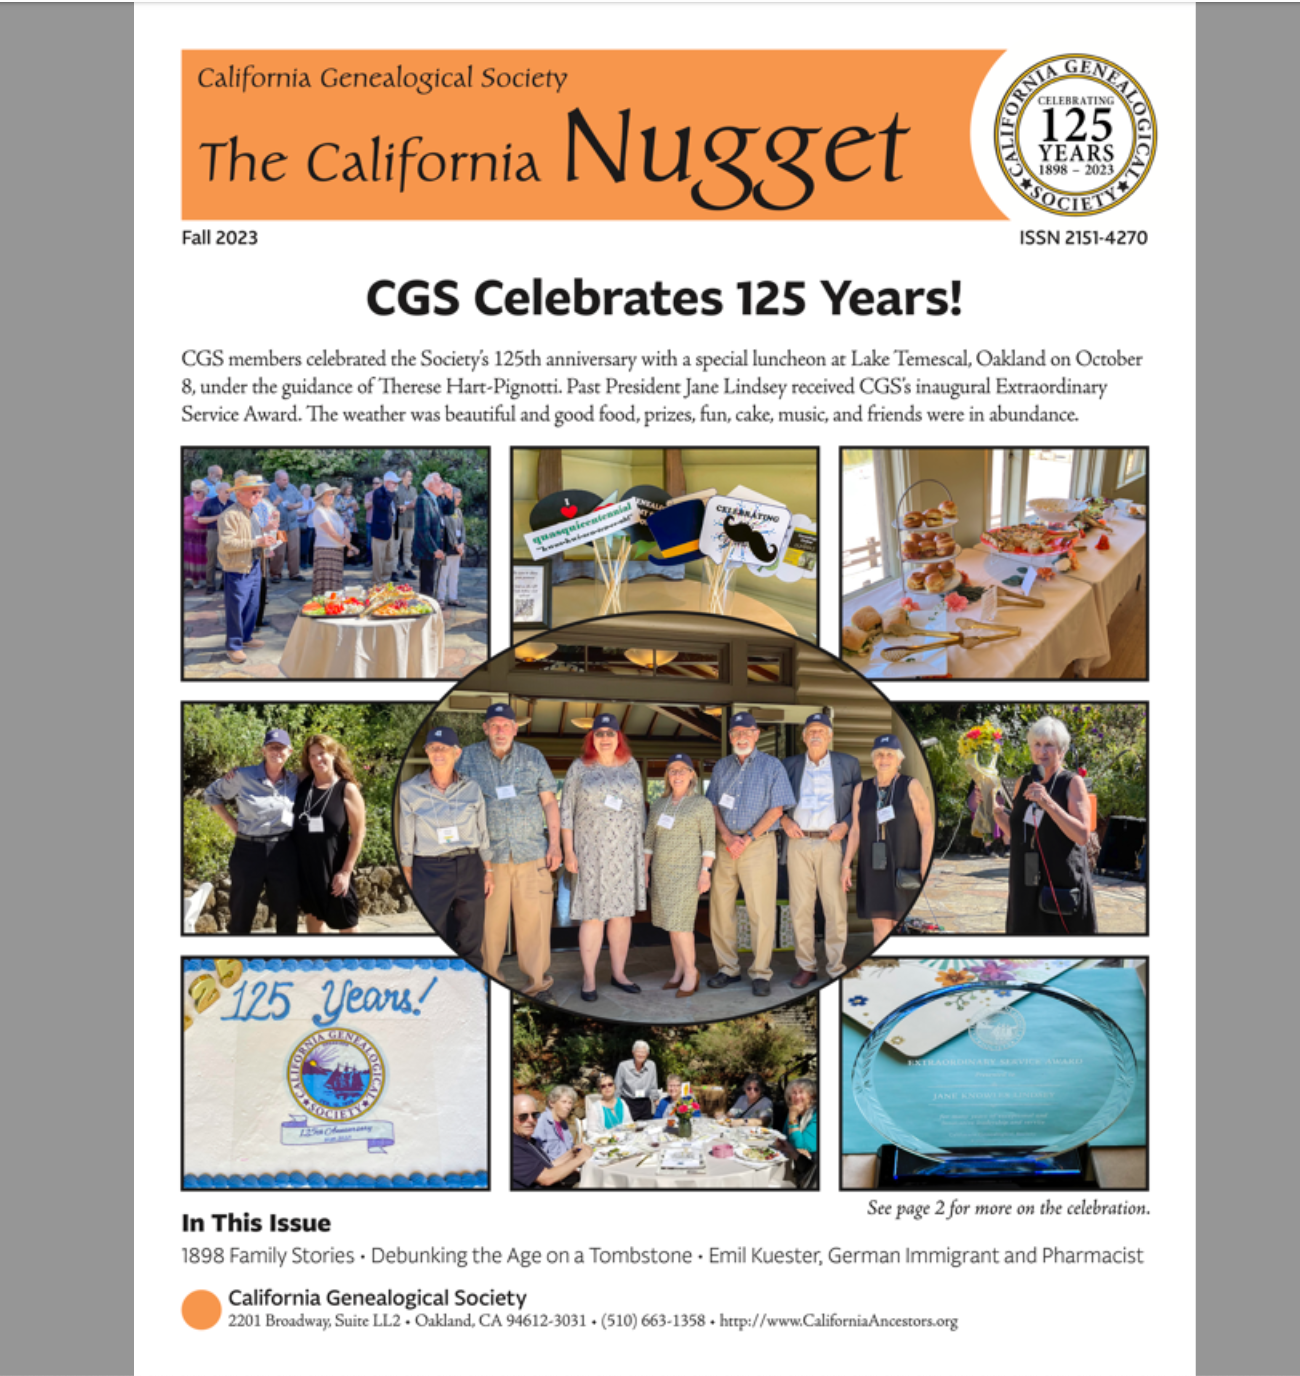 Colorful collage of photos from the CGS 125th Anniversary party.